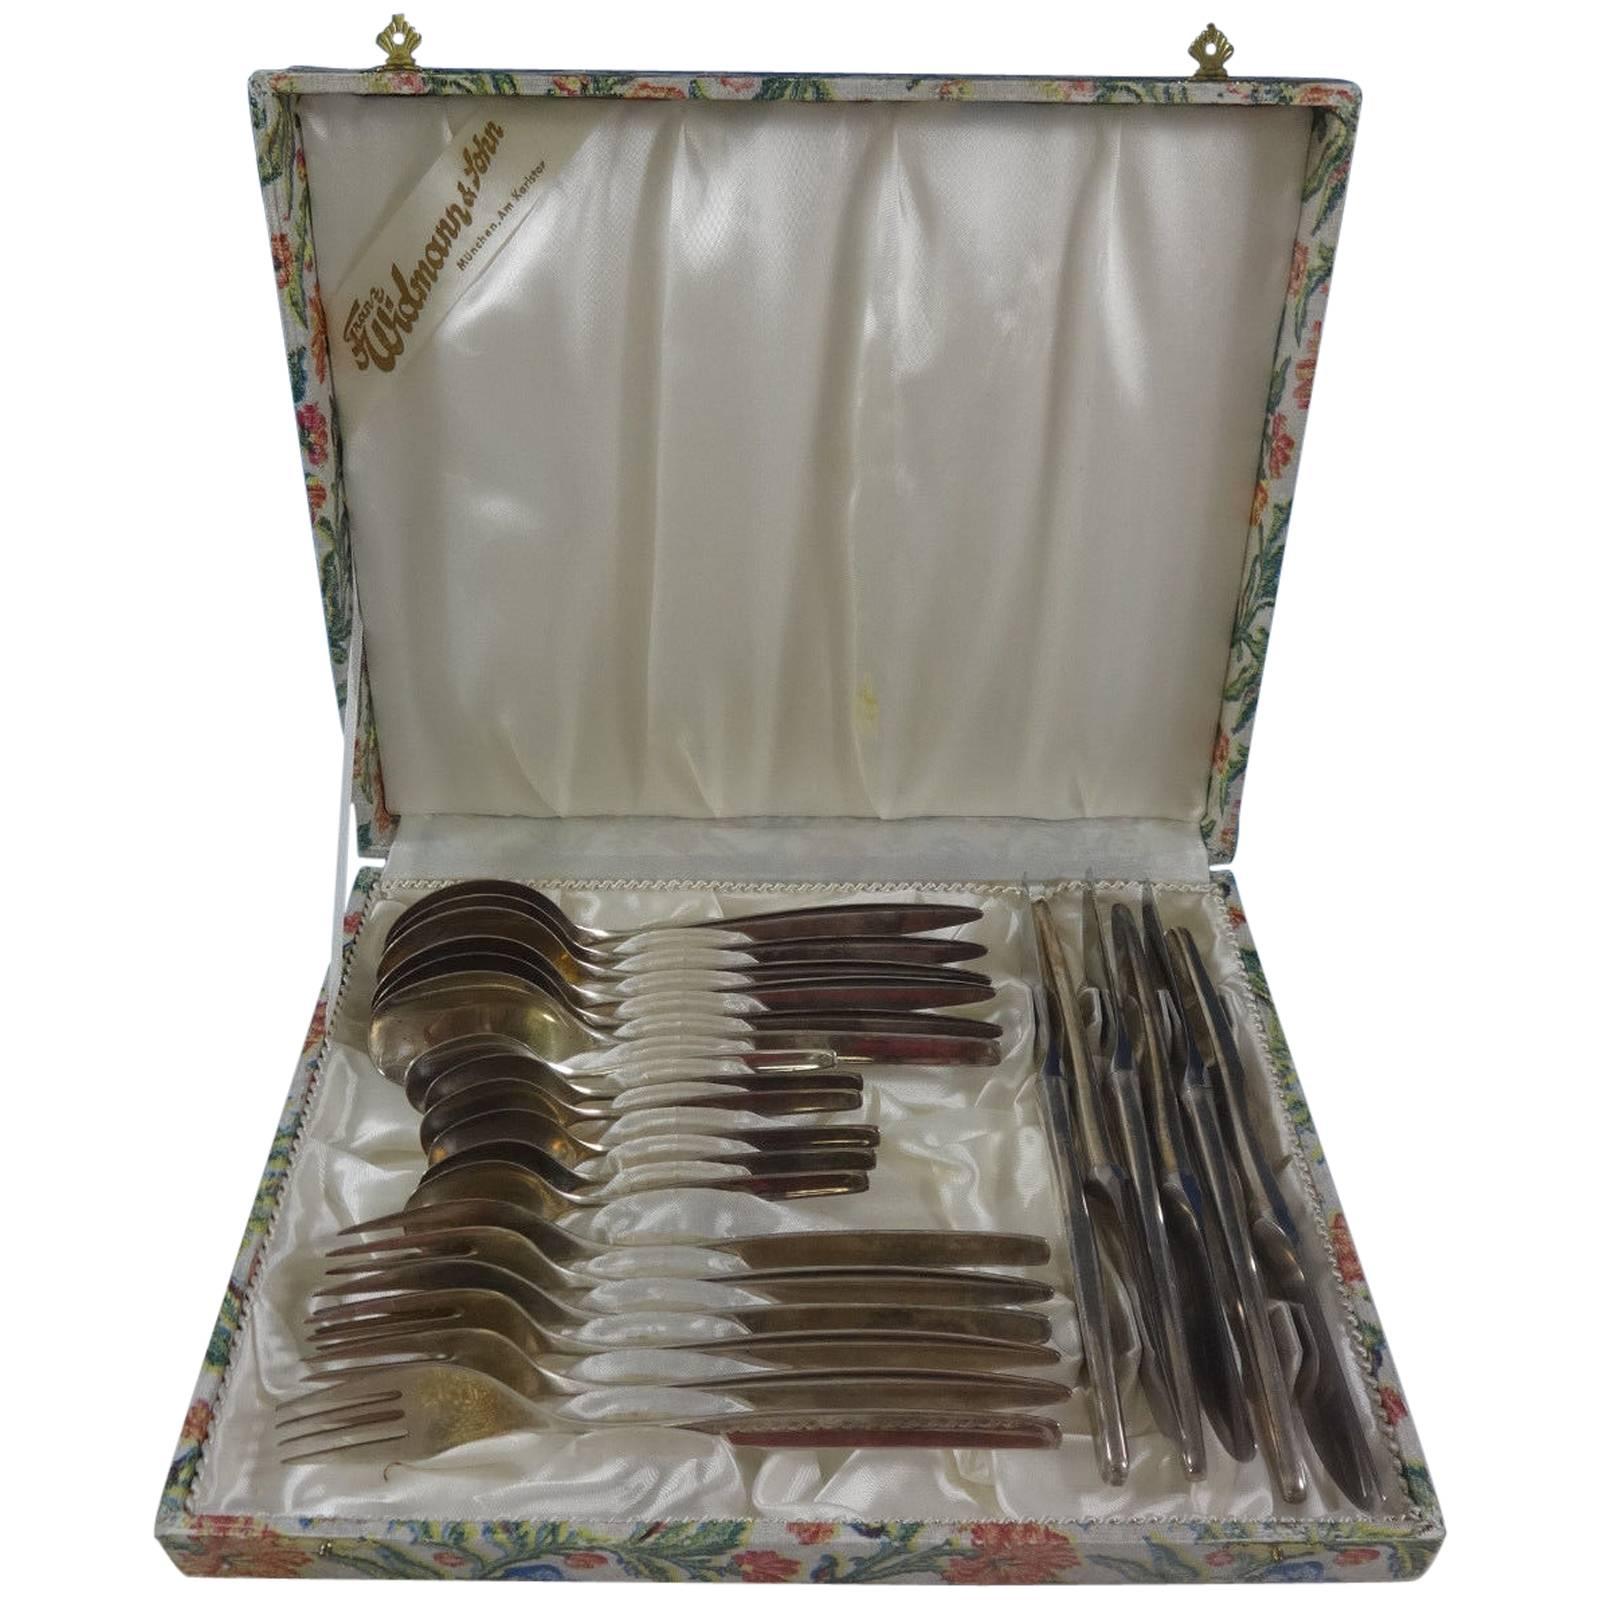 800 Silver Wmf #193 Flatware Set Service Dinner Size 24 Pieces in Vintage Box For Sale